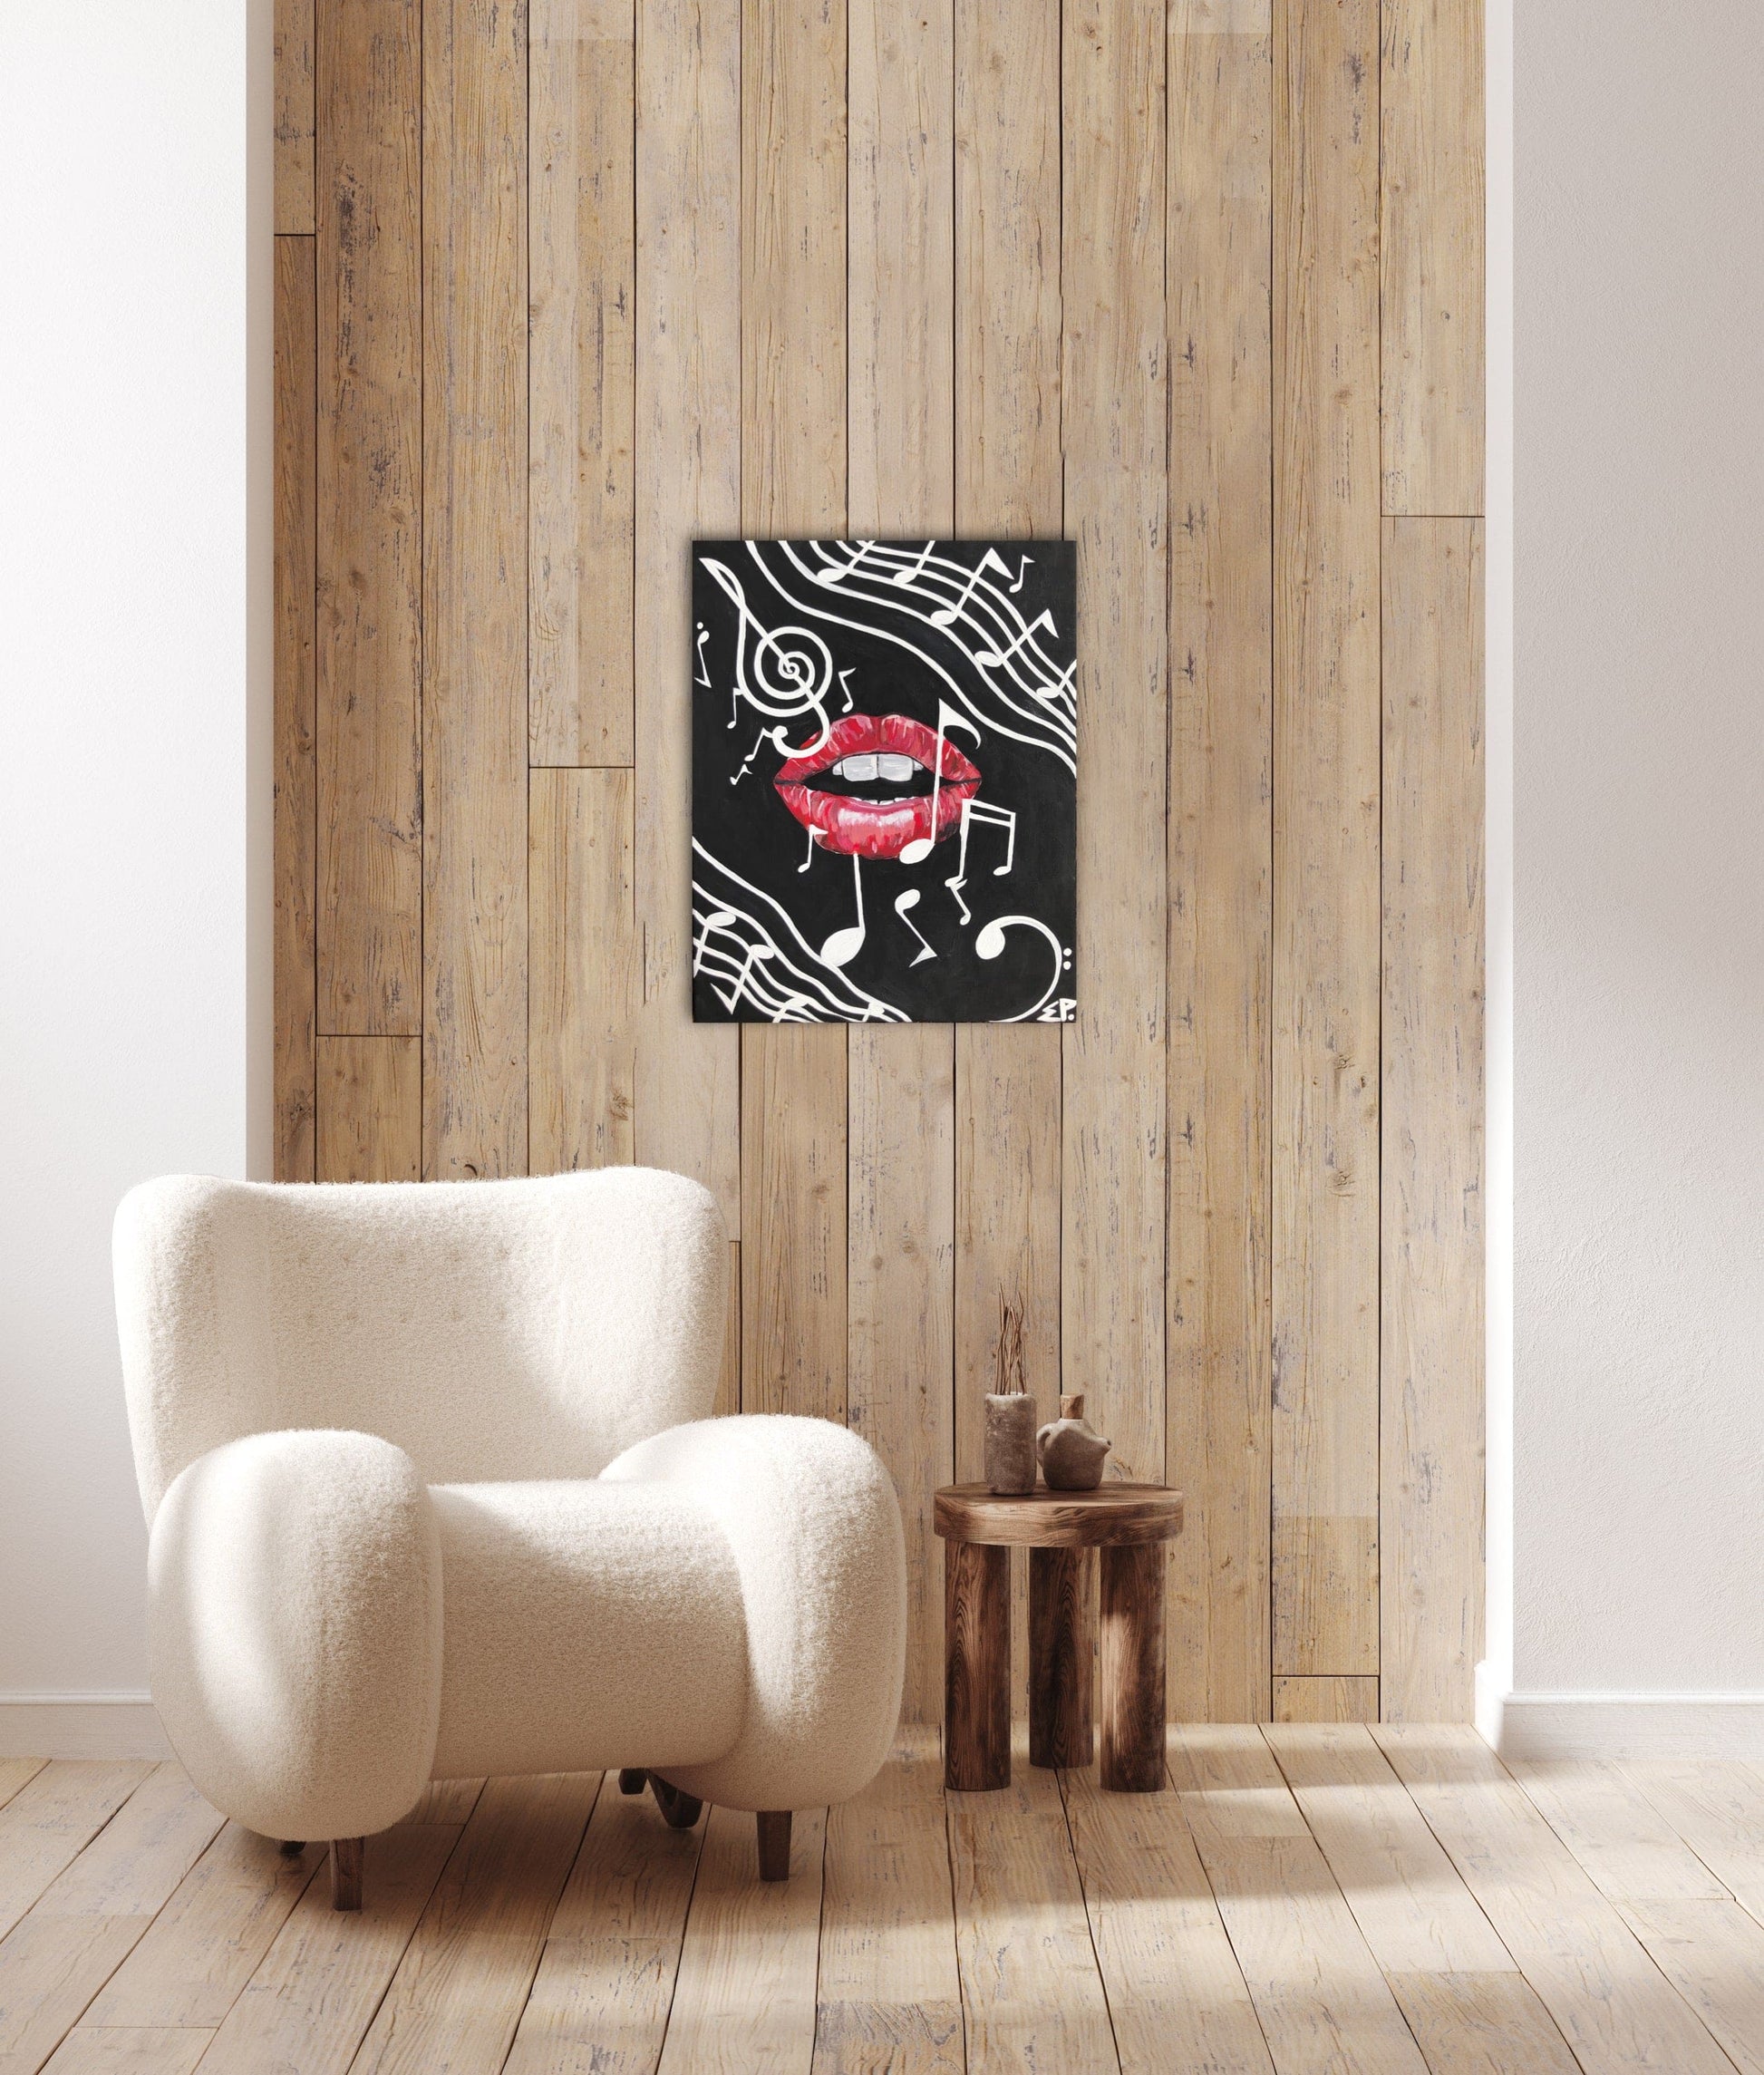 Music, my Love. - Medium Size, Acrylic Painting Of Lips Singing With Music Notes, Bold Wall Art Design, by Art with Evie